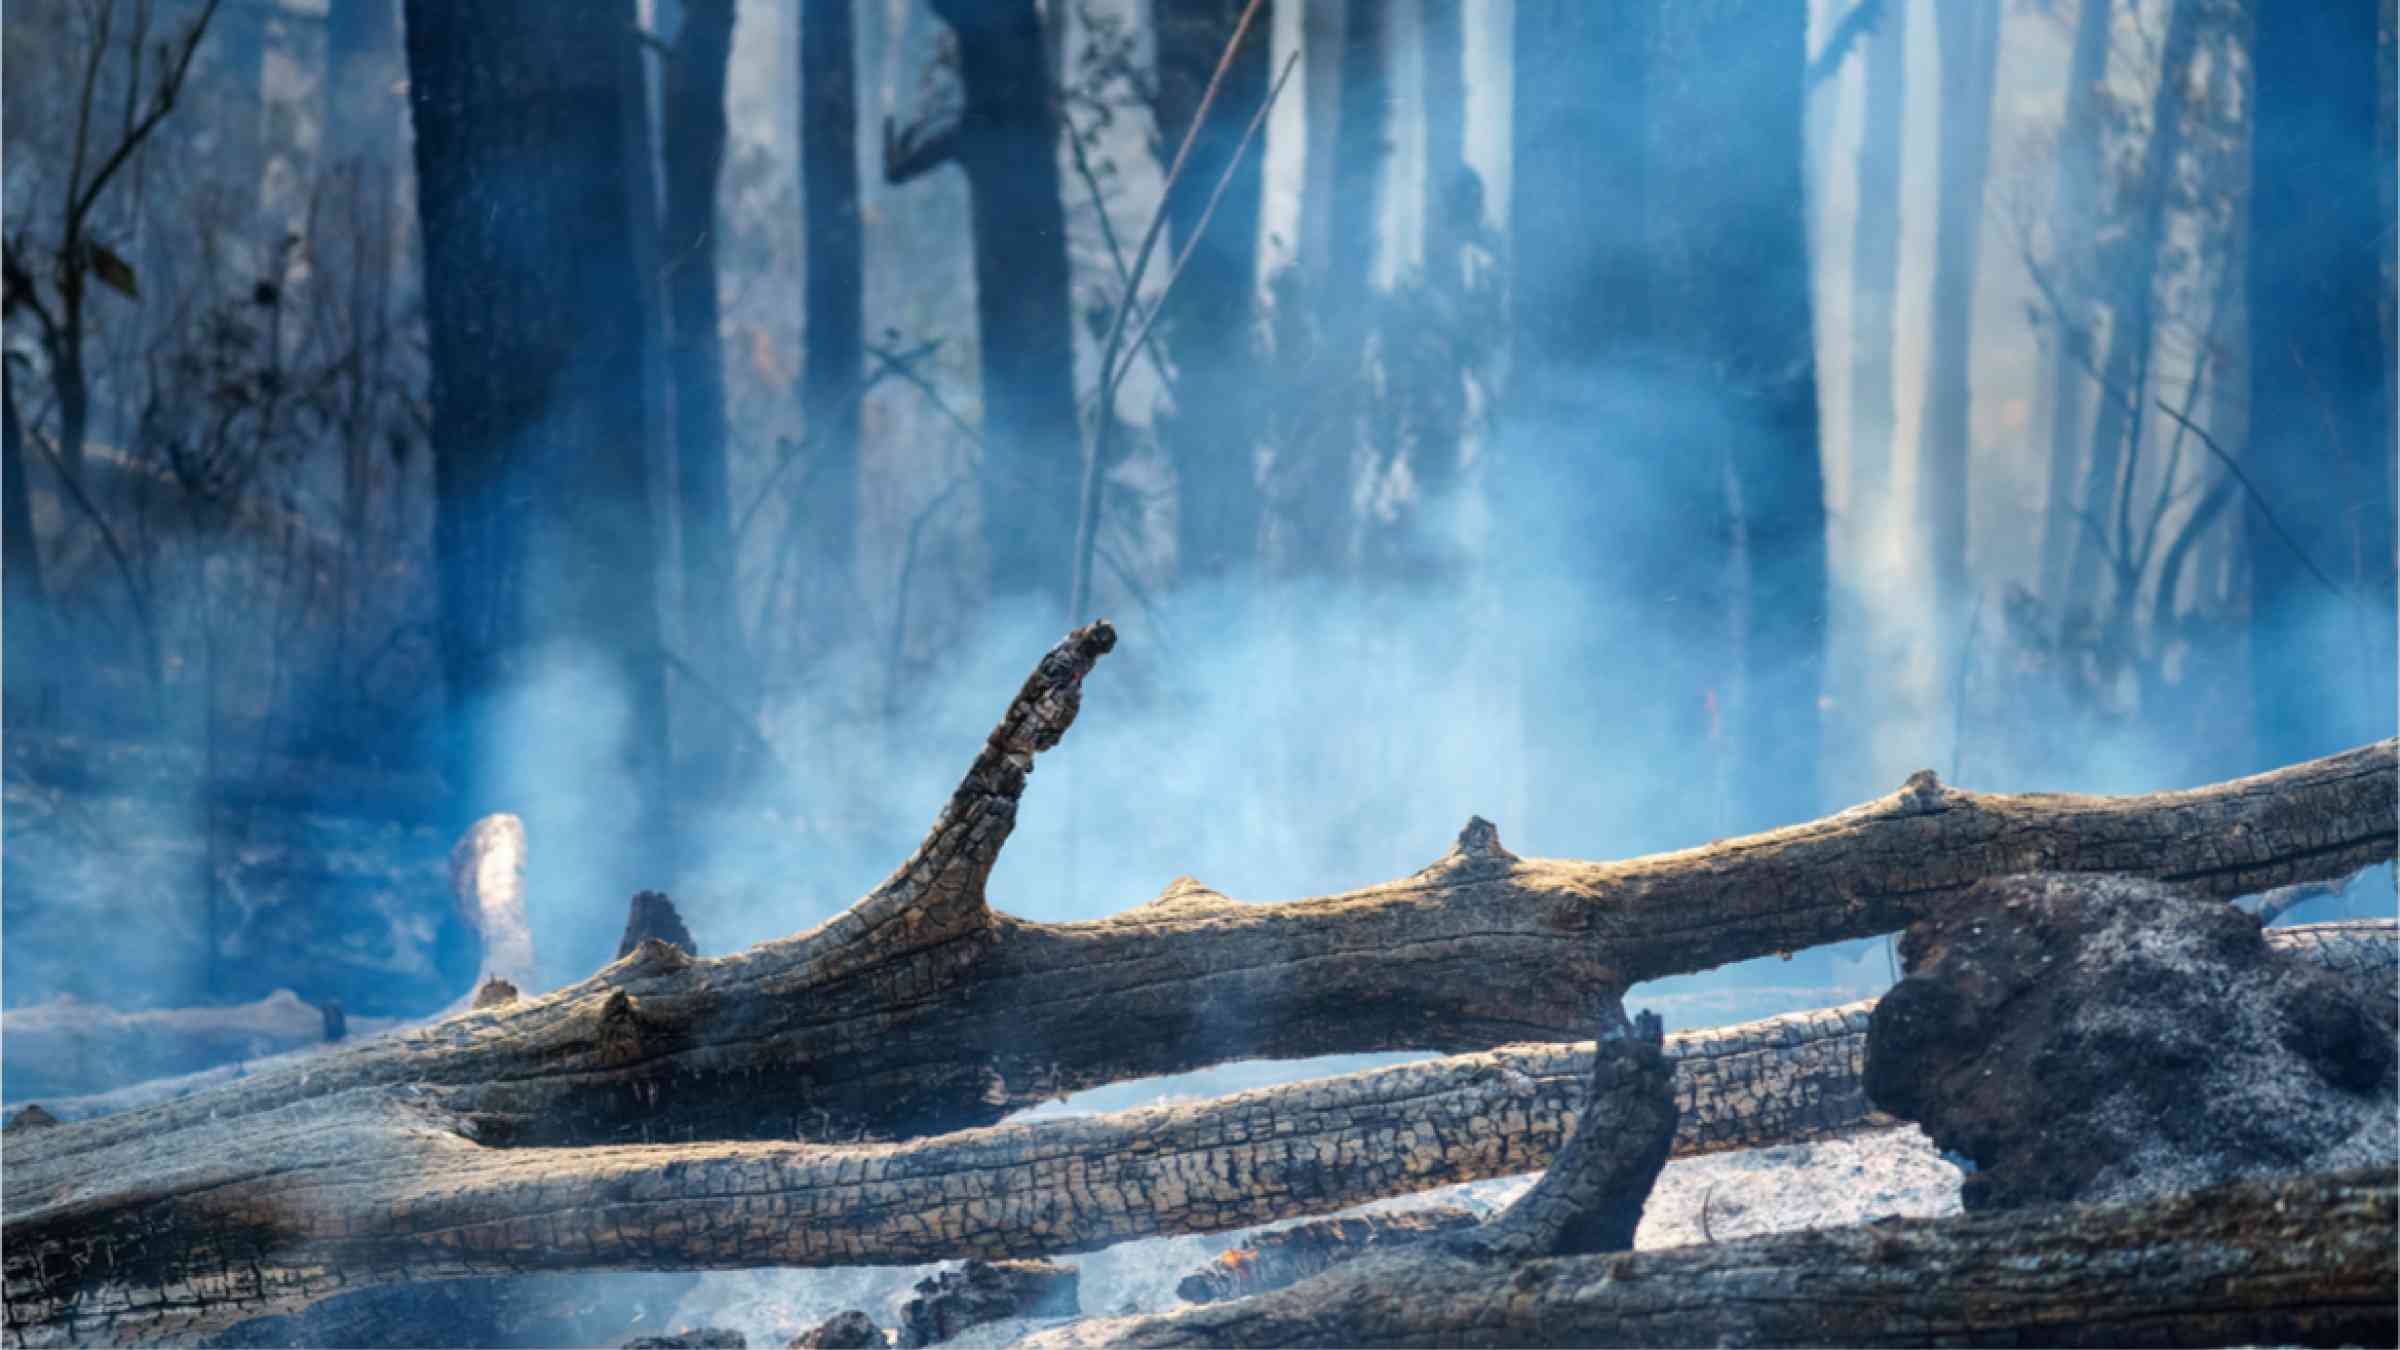 This image shows dead trees that were destroyed by a forest fire and are now covered with frost and rain.